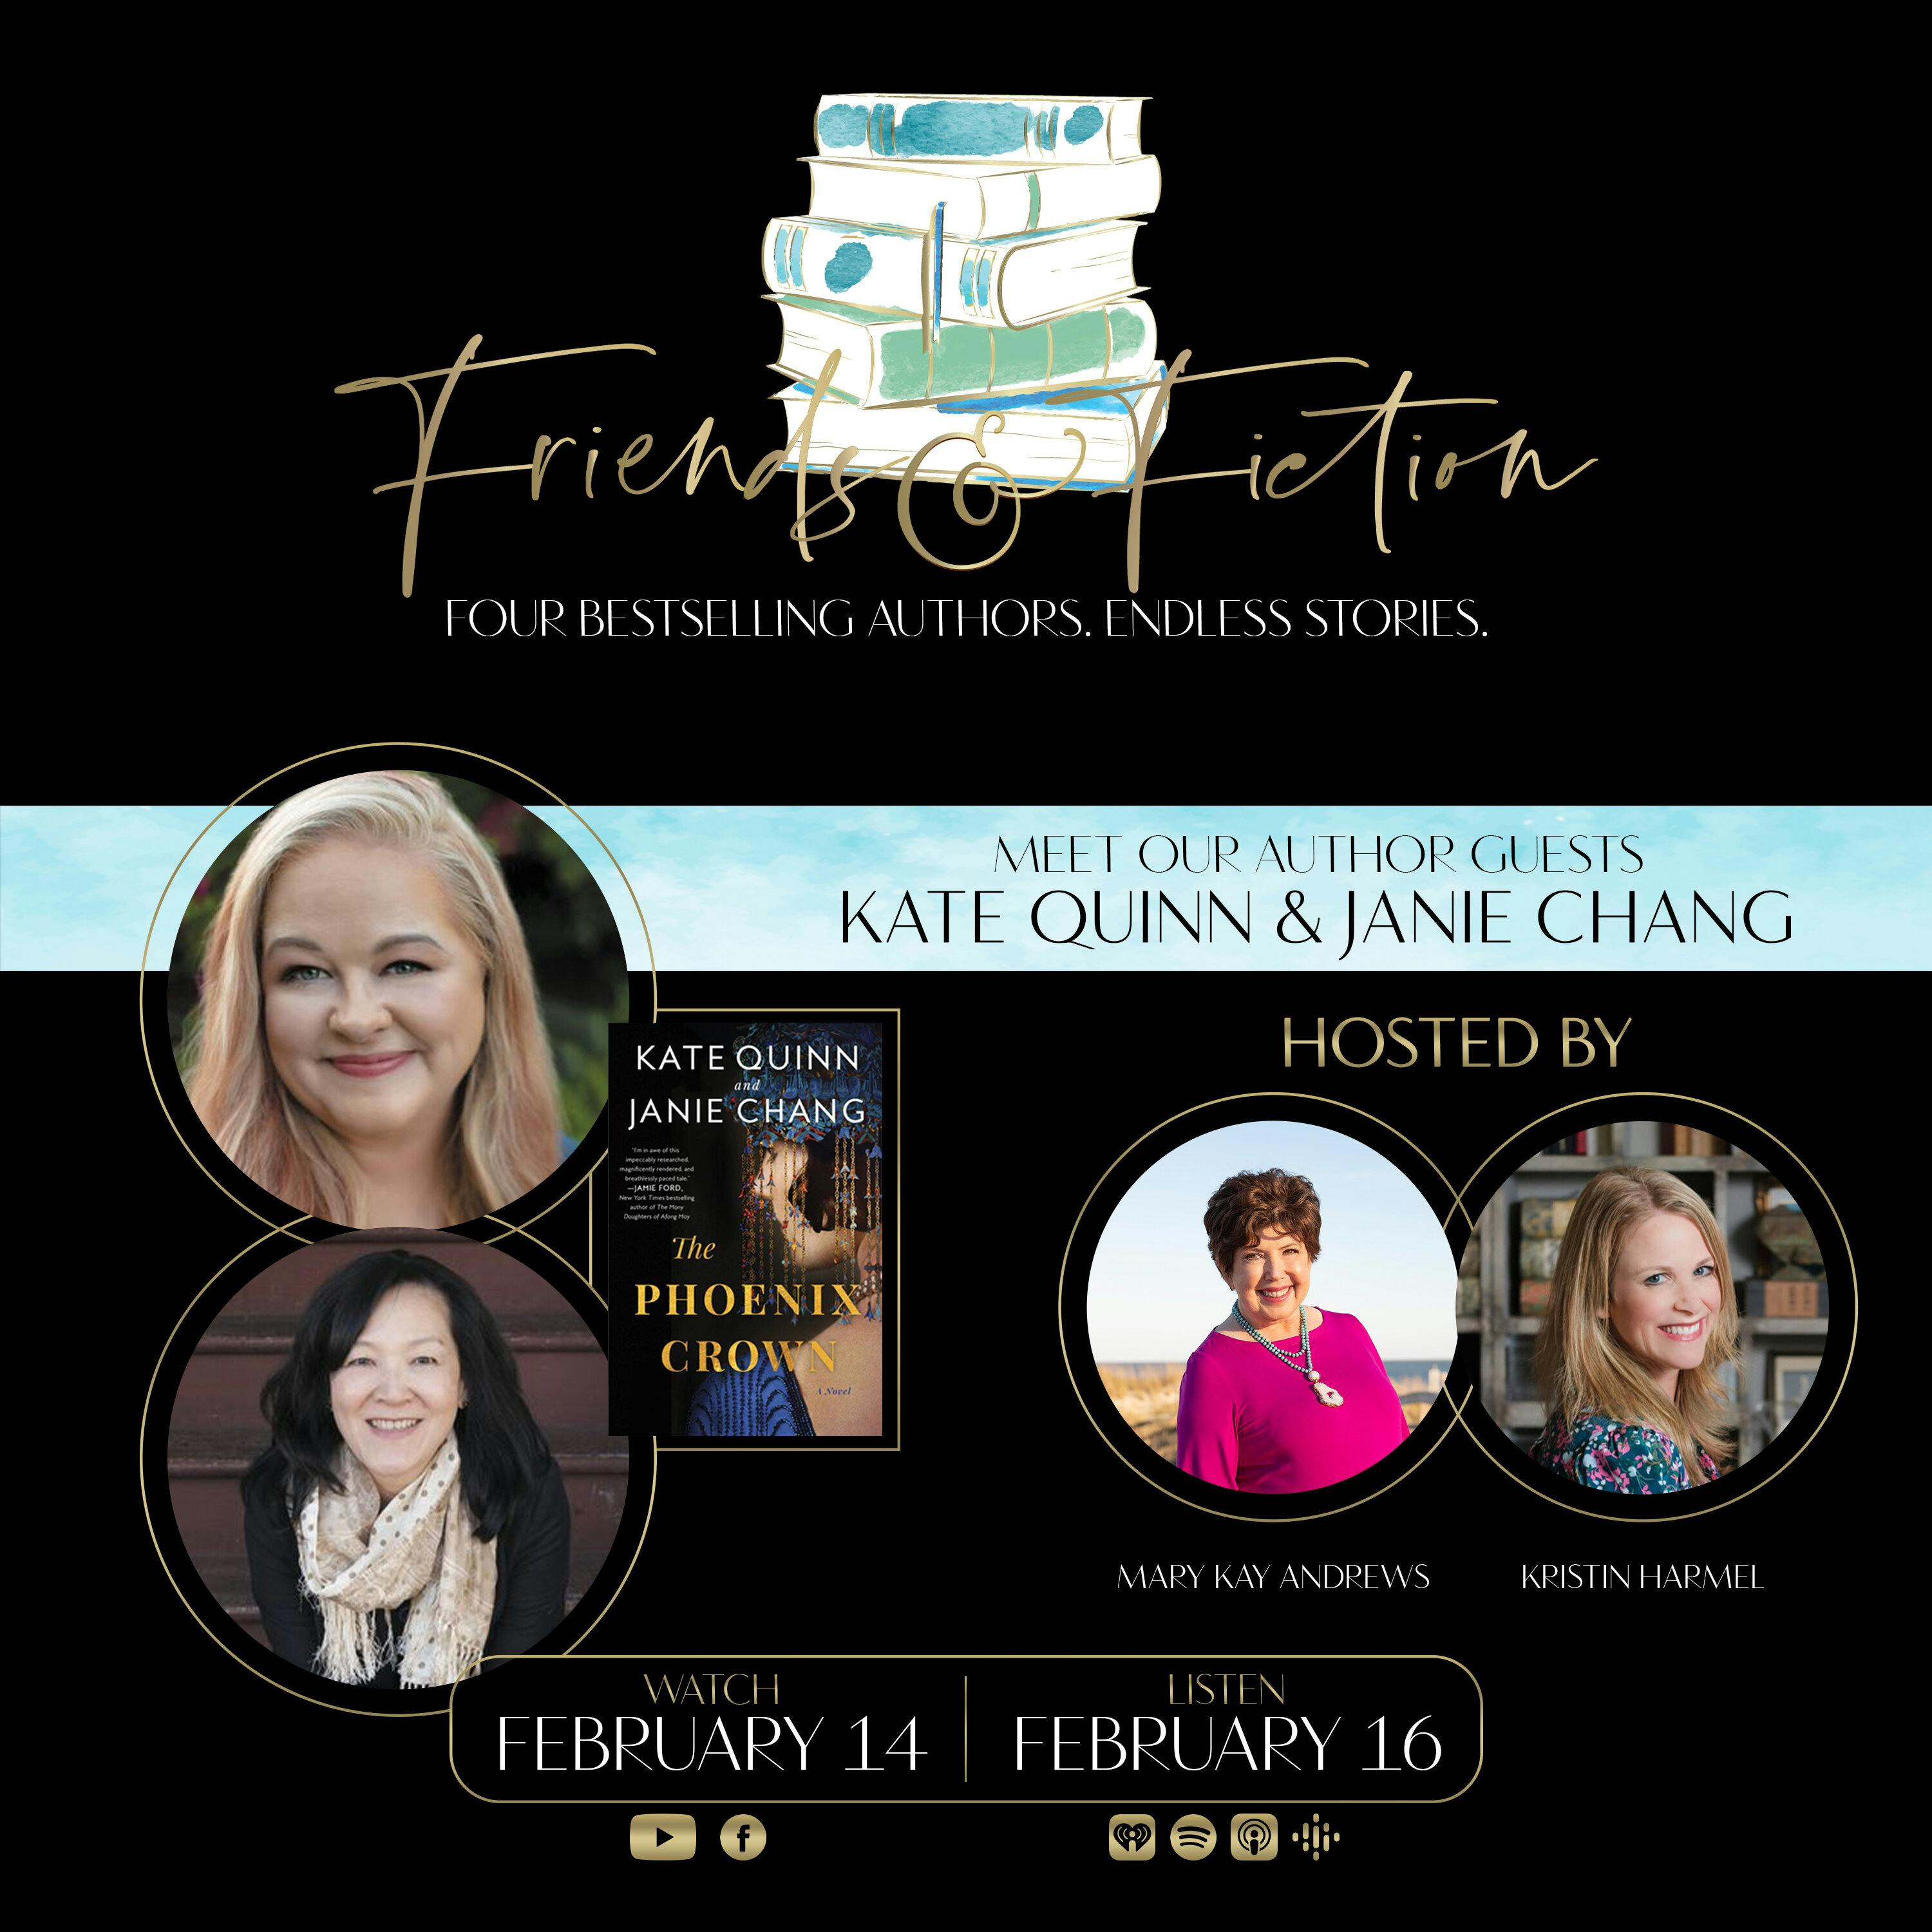 Friends & Fiction with Kate Quinn & Janie Chang